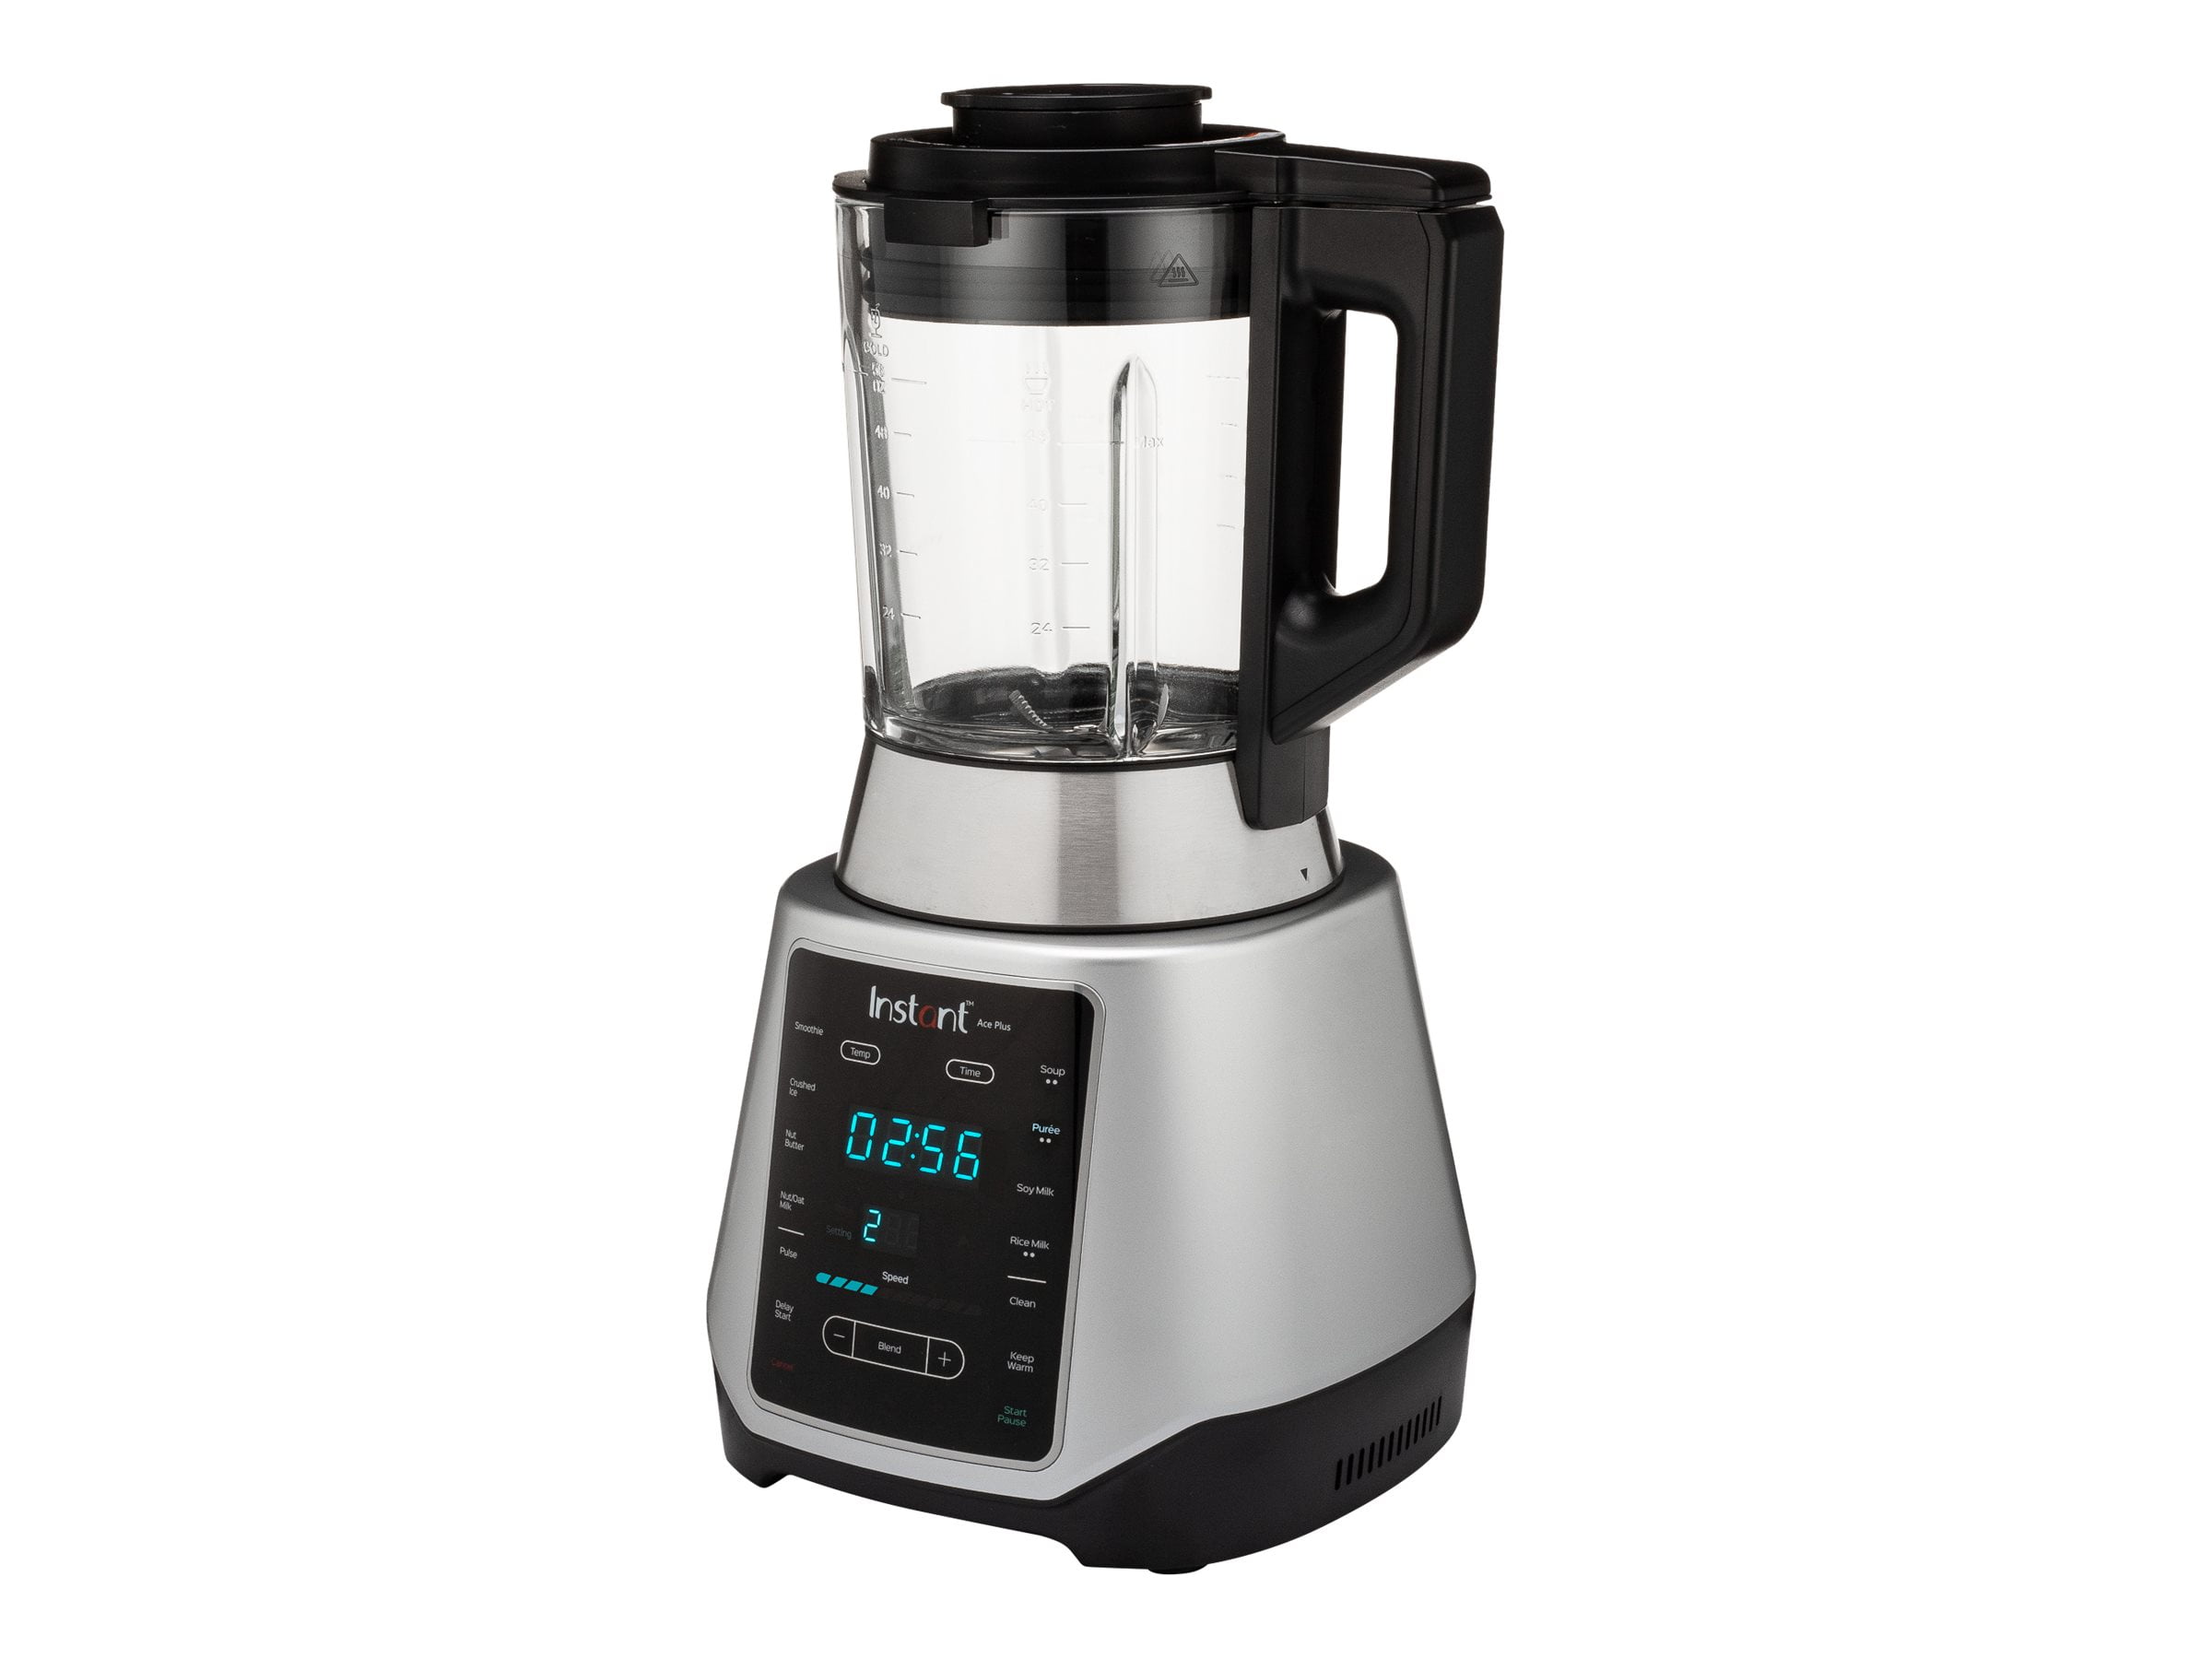 About America's Test Kitchen & Our Instant Pot Ace Blender